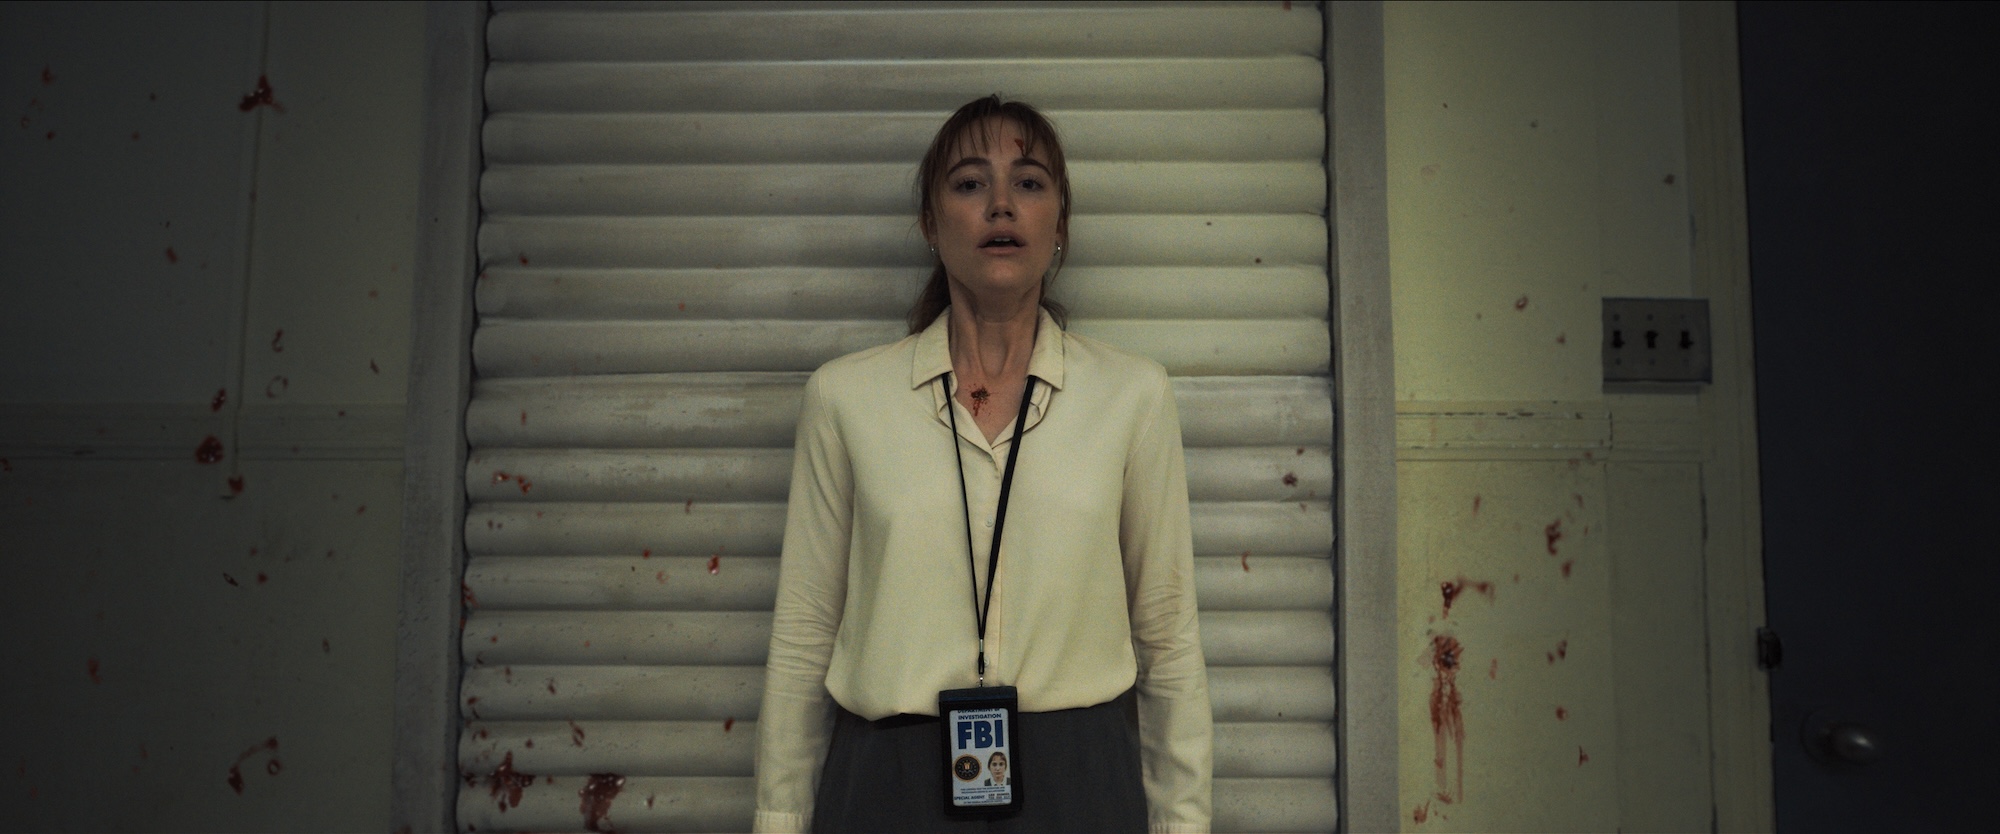 A woman wearing an FBI ID lanyard stands in what seems to be a dim, blood-splattered room in Longlegs.